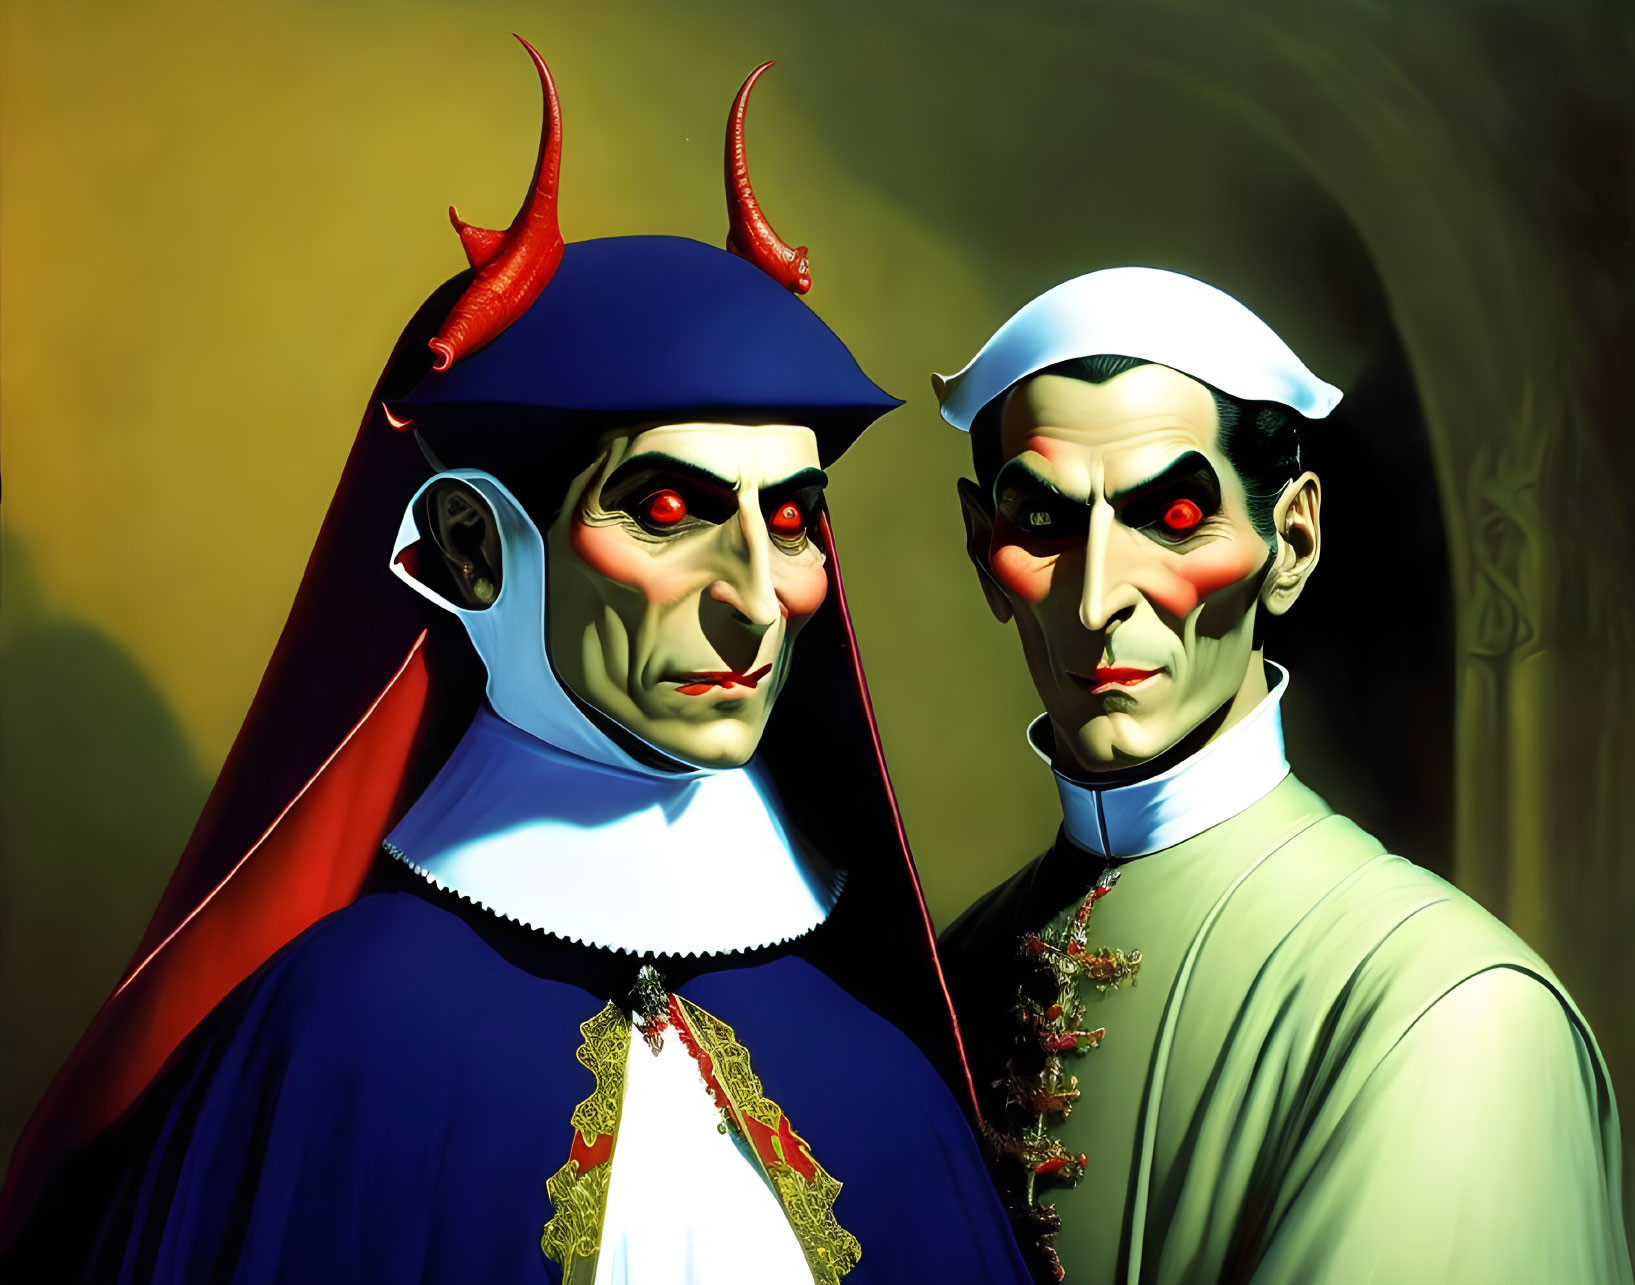 Stylized characters with vampire-like features and red horns in medieval attire with gothic backdrop